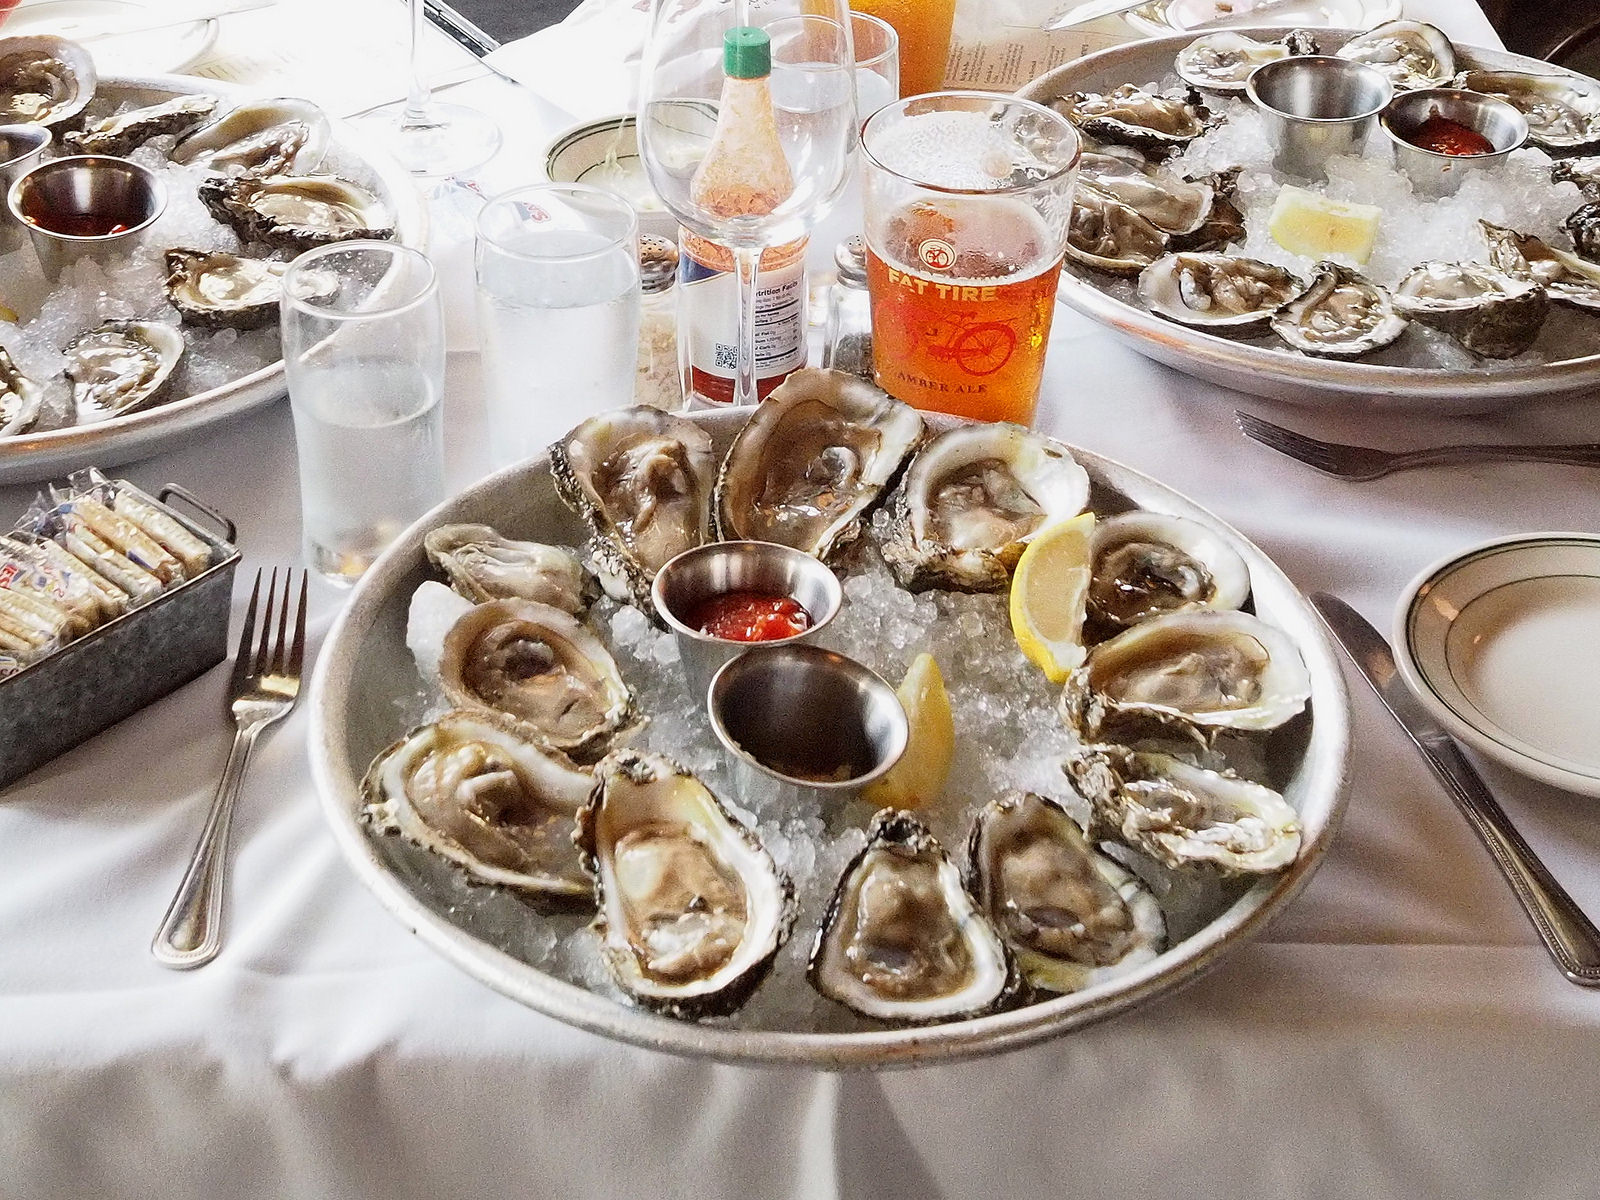 Oyster happy hour